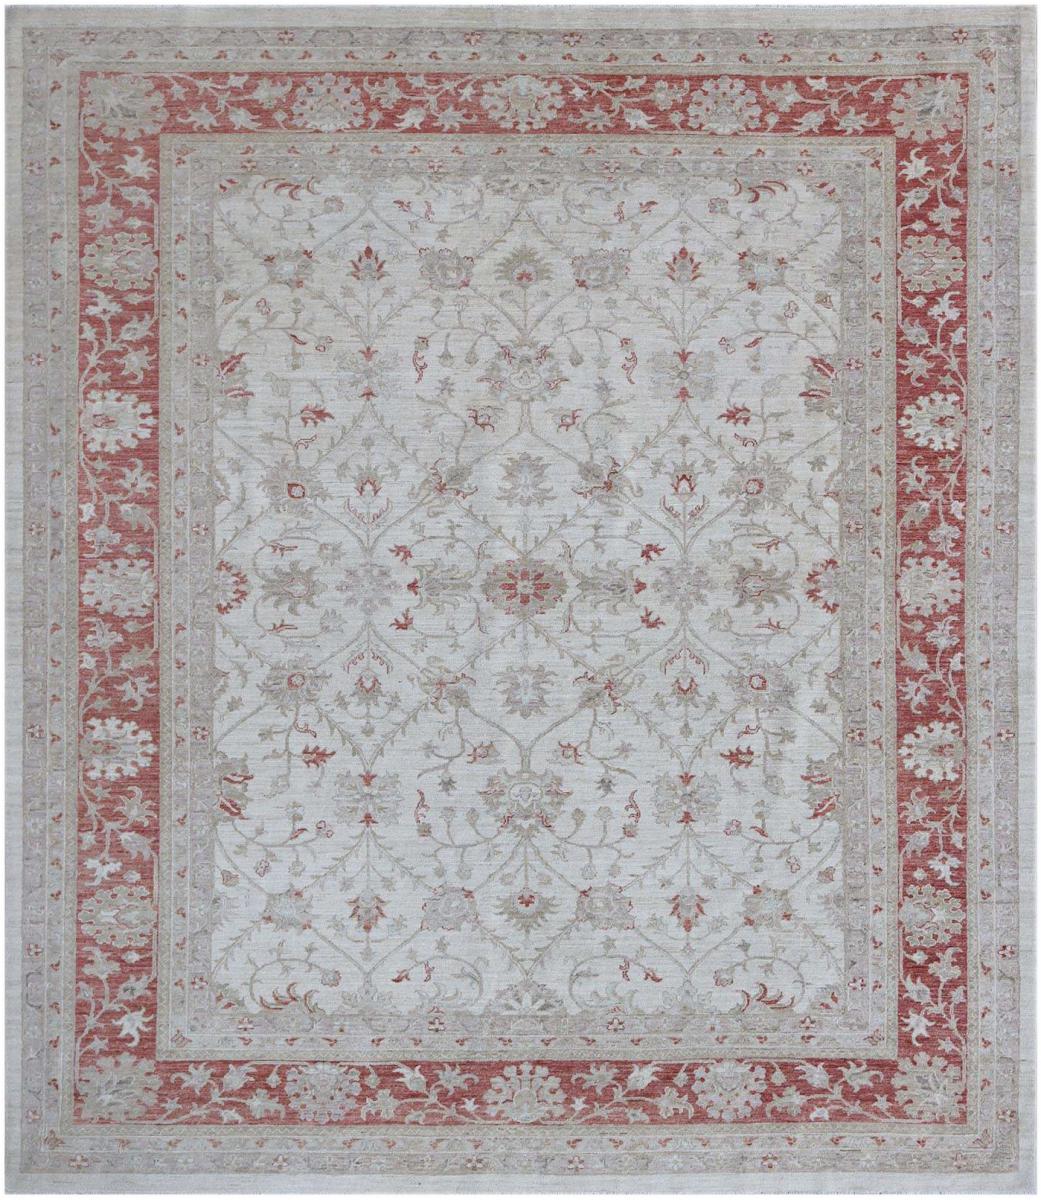 Pakistani rug Ziegler Farahan 299x251 299x251, Persian Rug Knotted by hand